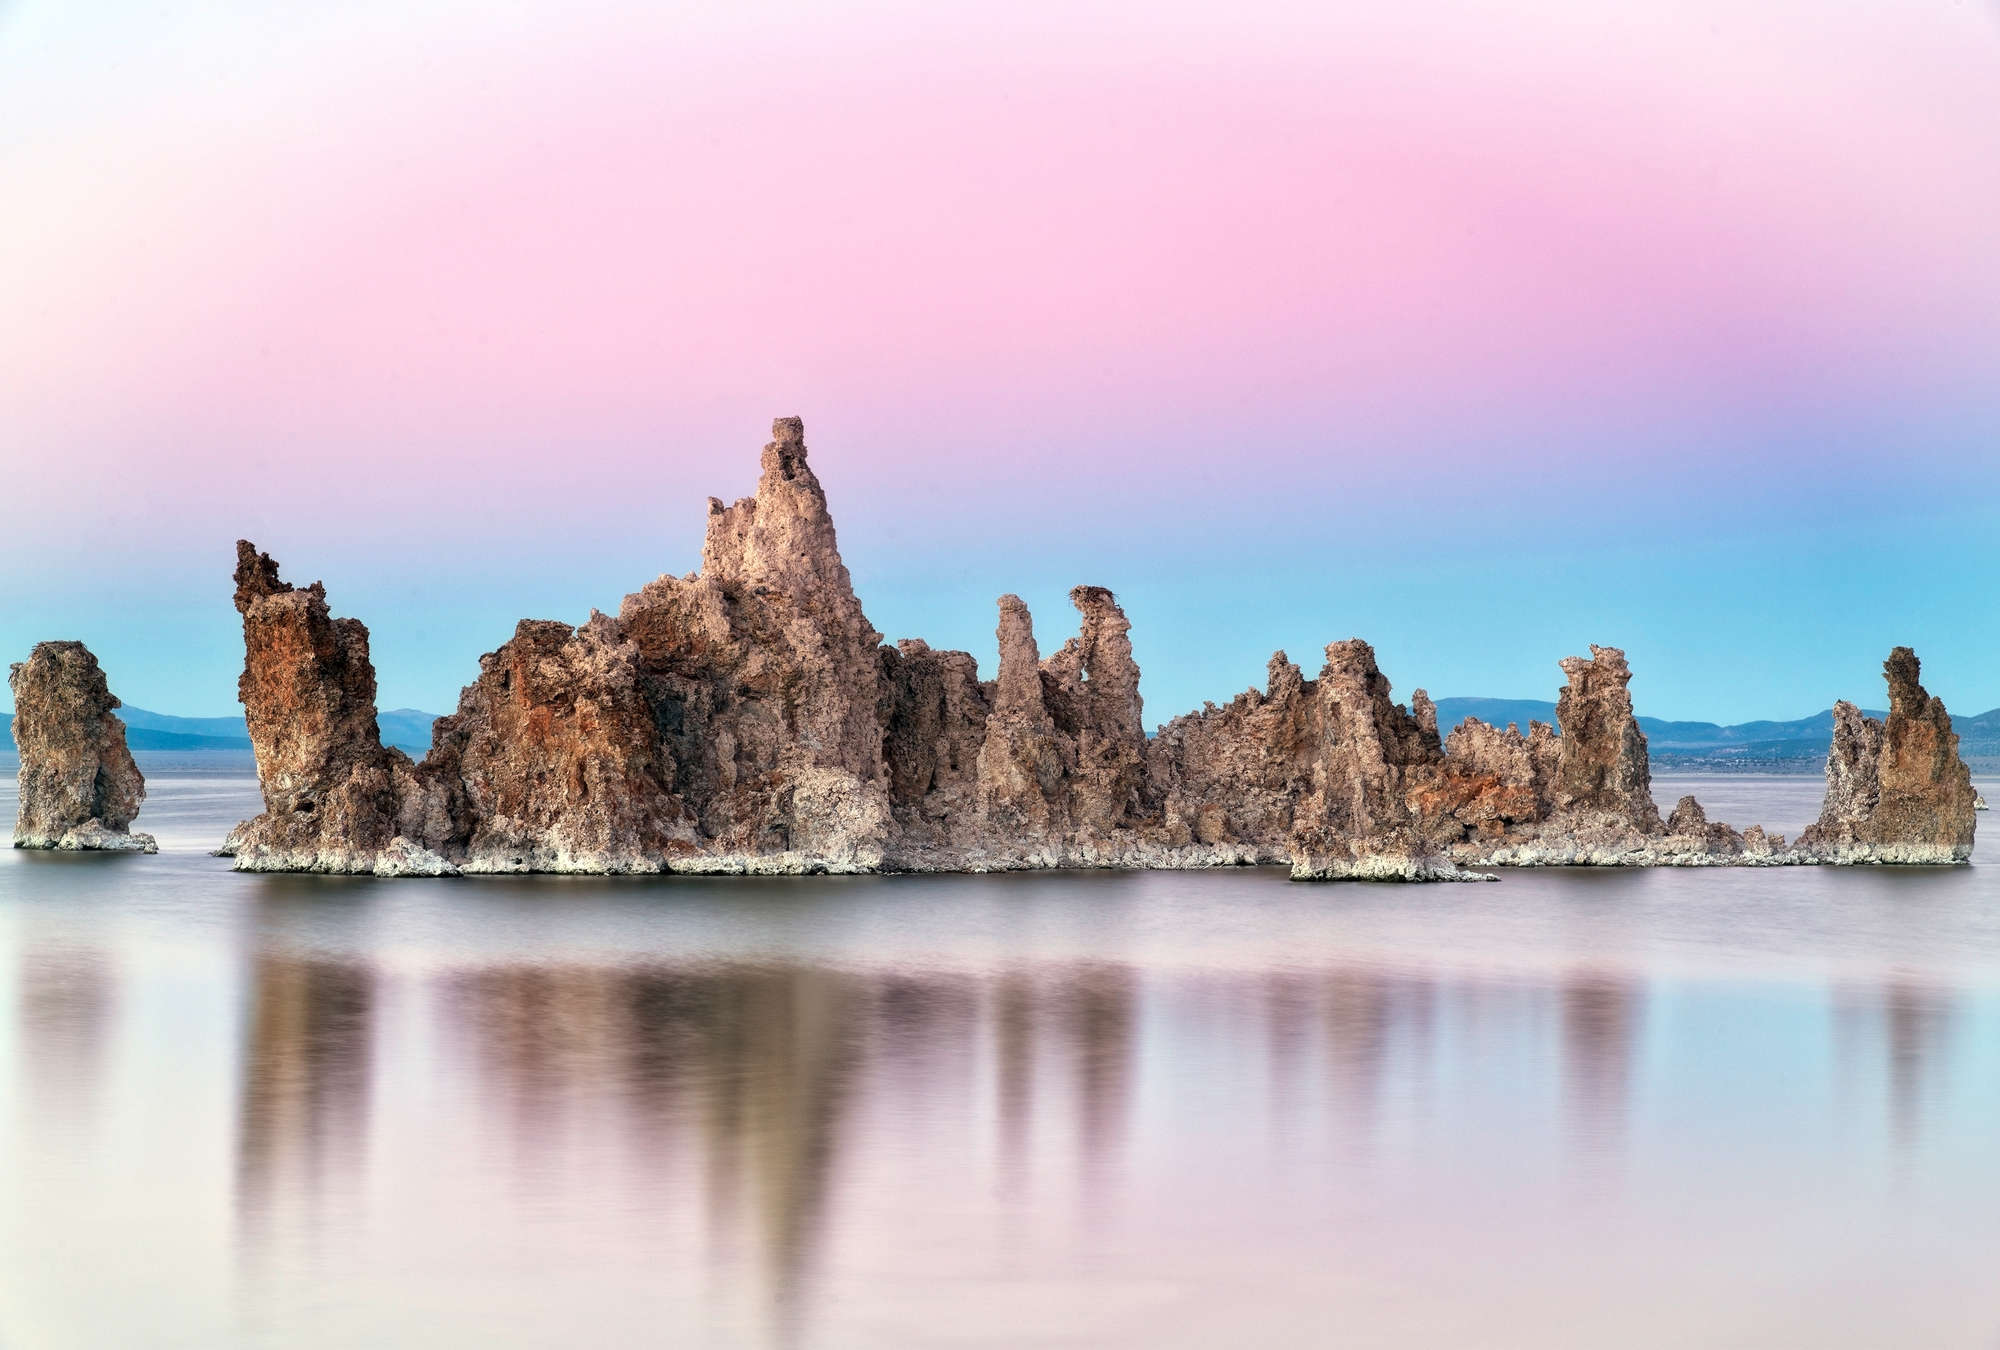             Photo wallpaper rocks in reflecting water with pink sky
        